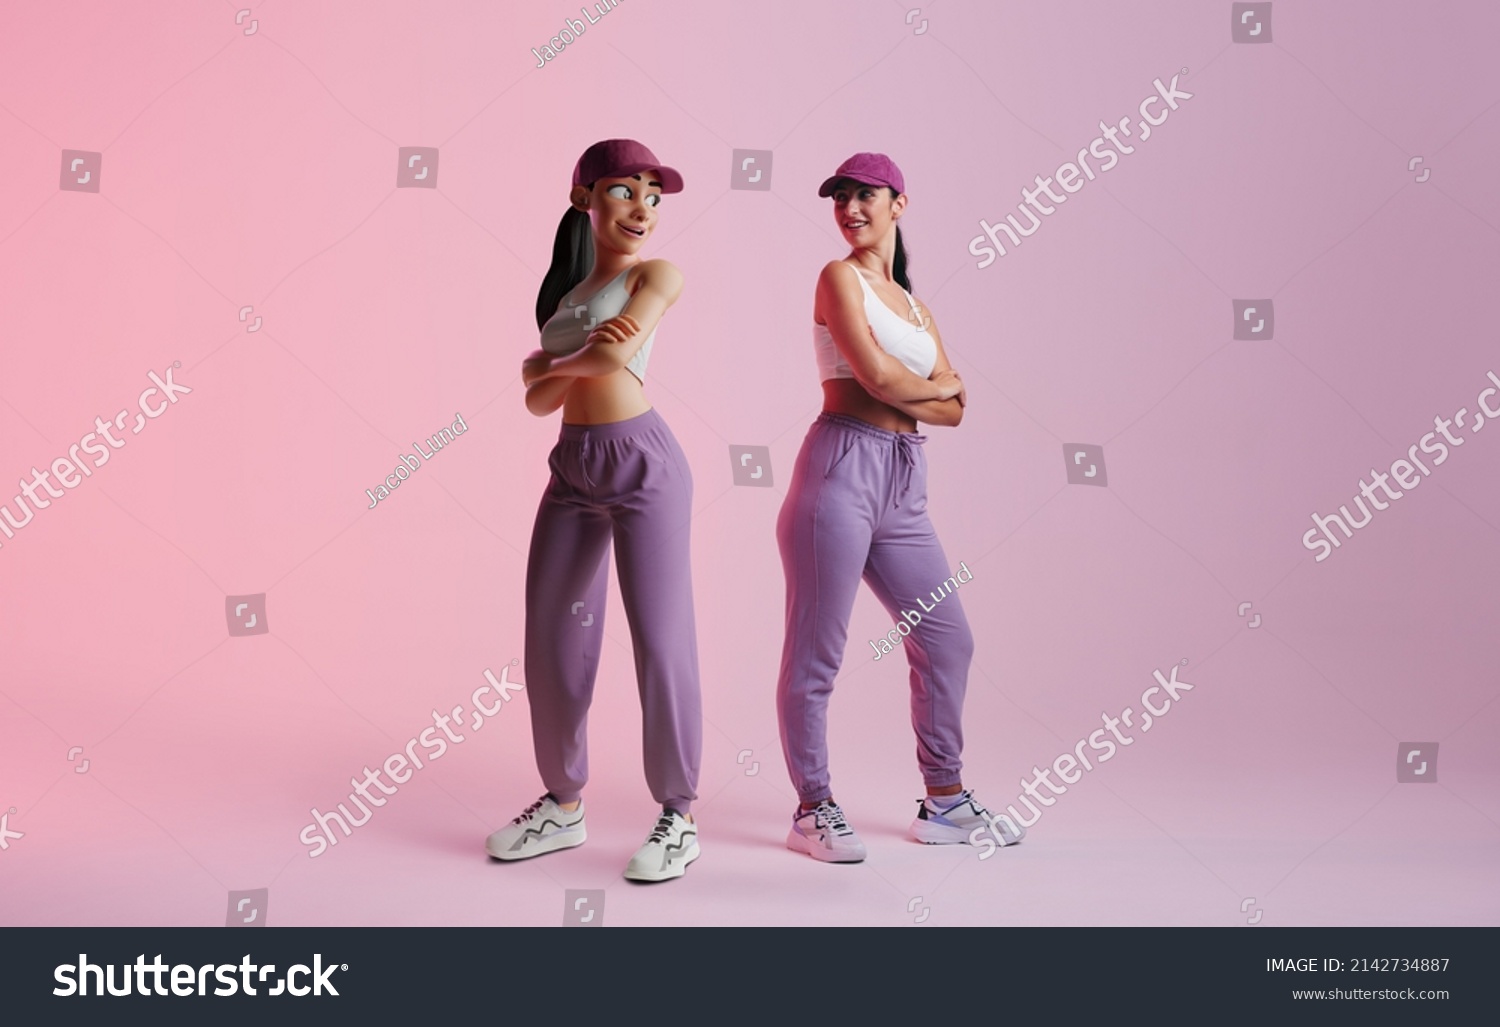 Happy young woman standing next to her metaverse avatar in a studio. Cheerful young woman smiling at the 3D simulation of herself. Young woman exploring virtual reality. #2142734887